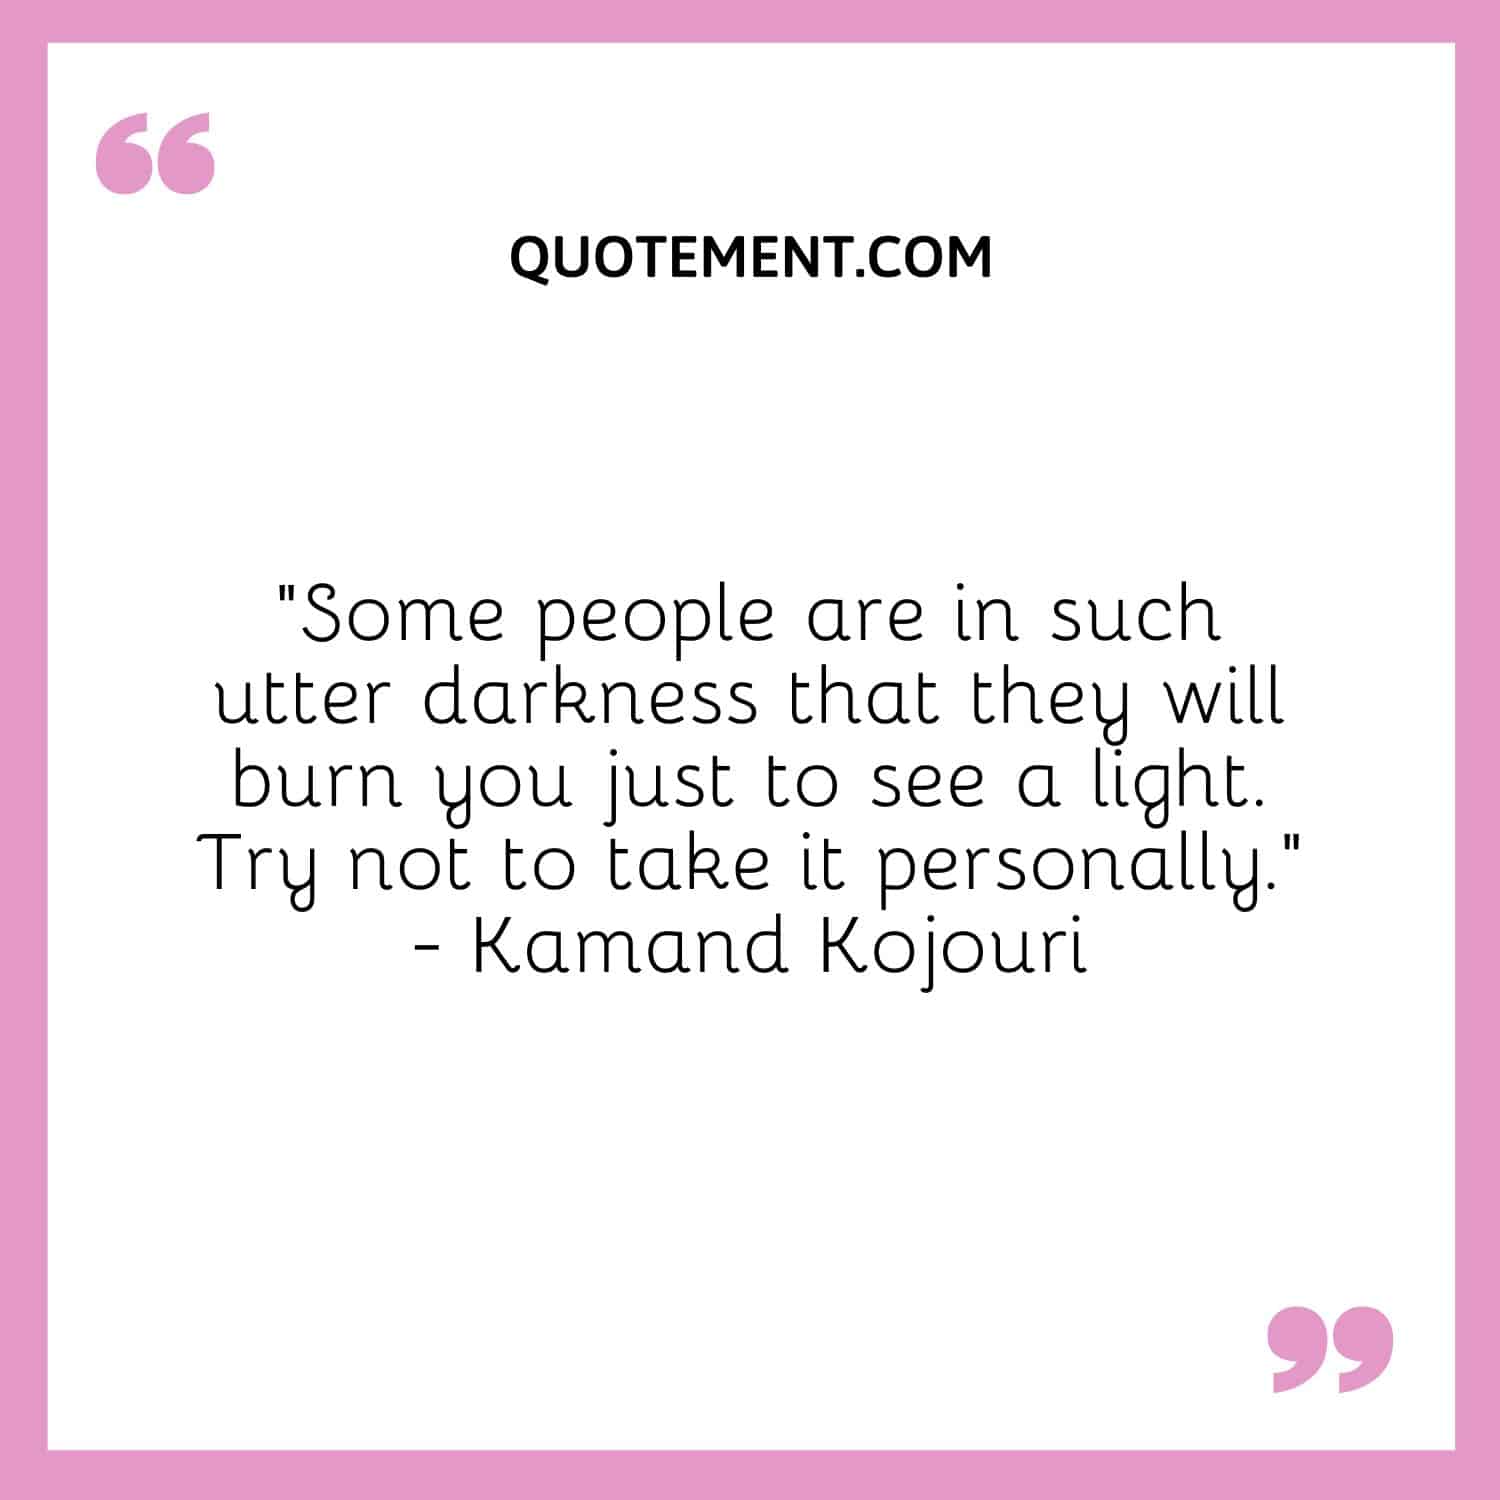 “Some people are in such utter darkness that they will burn you just to see a light. Try not to take it personally.” - Kamand Kojouri